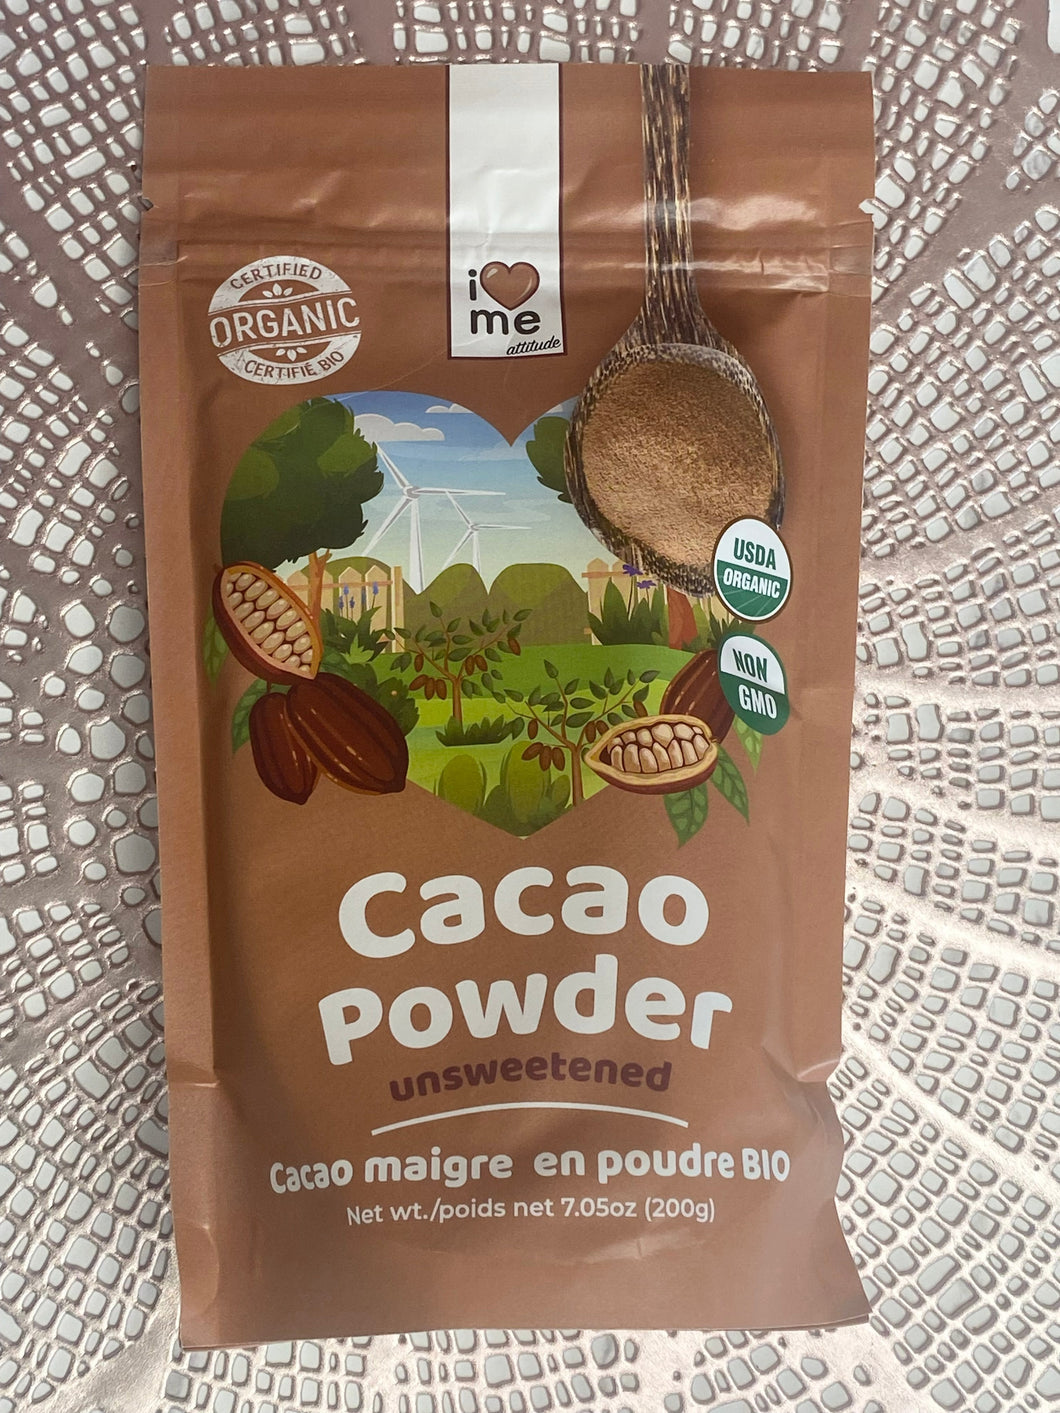 Unsweetened Cacao Powder